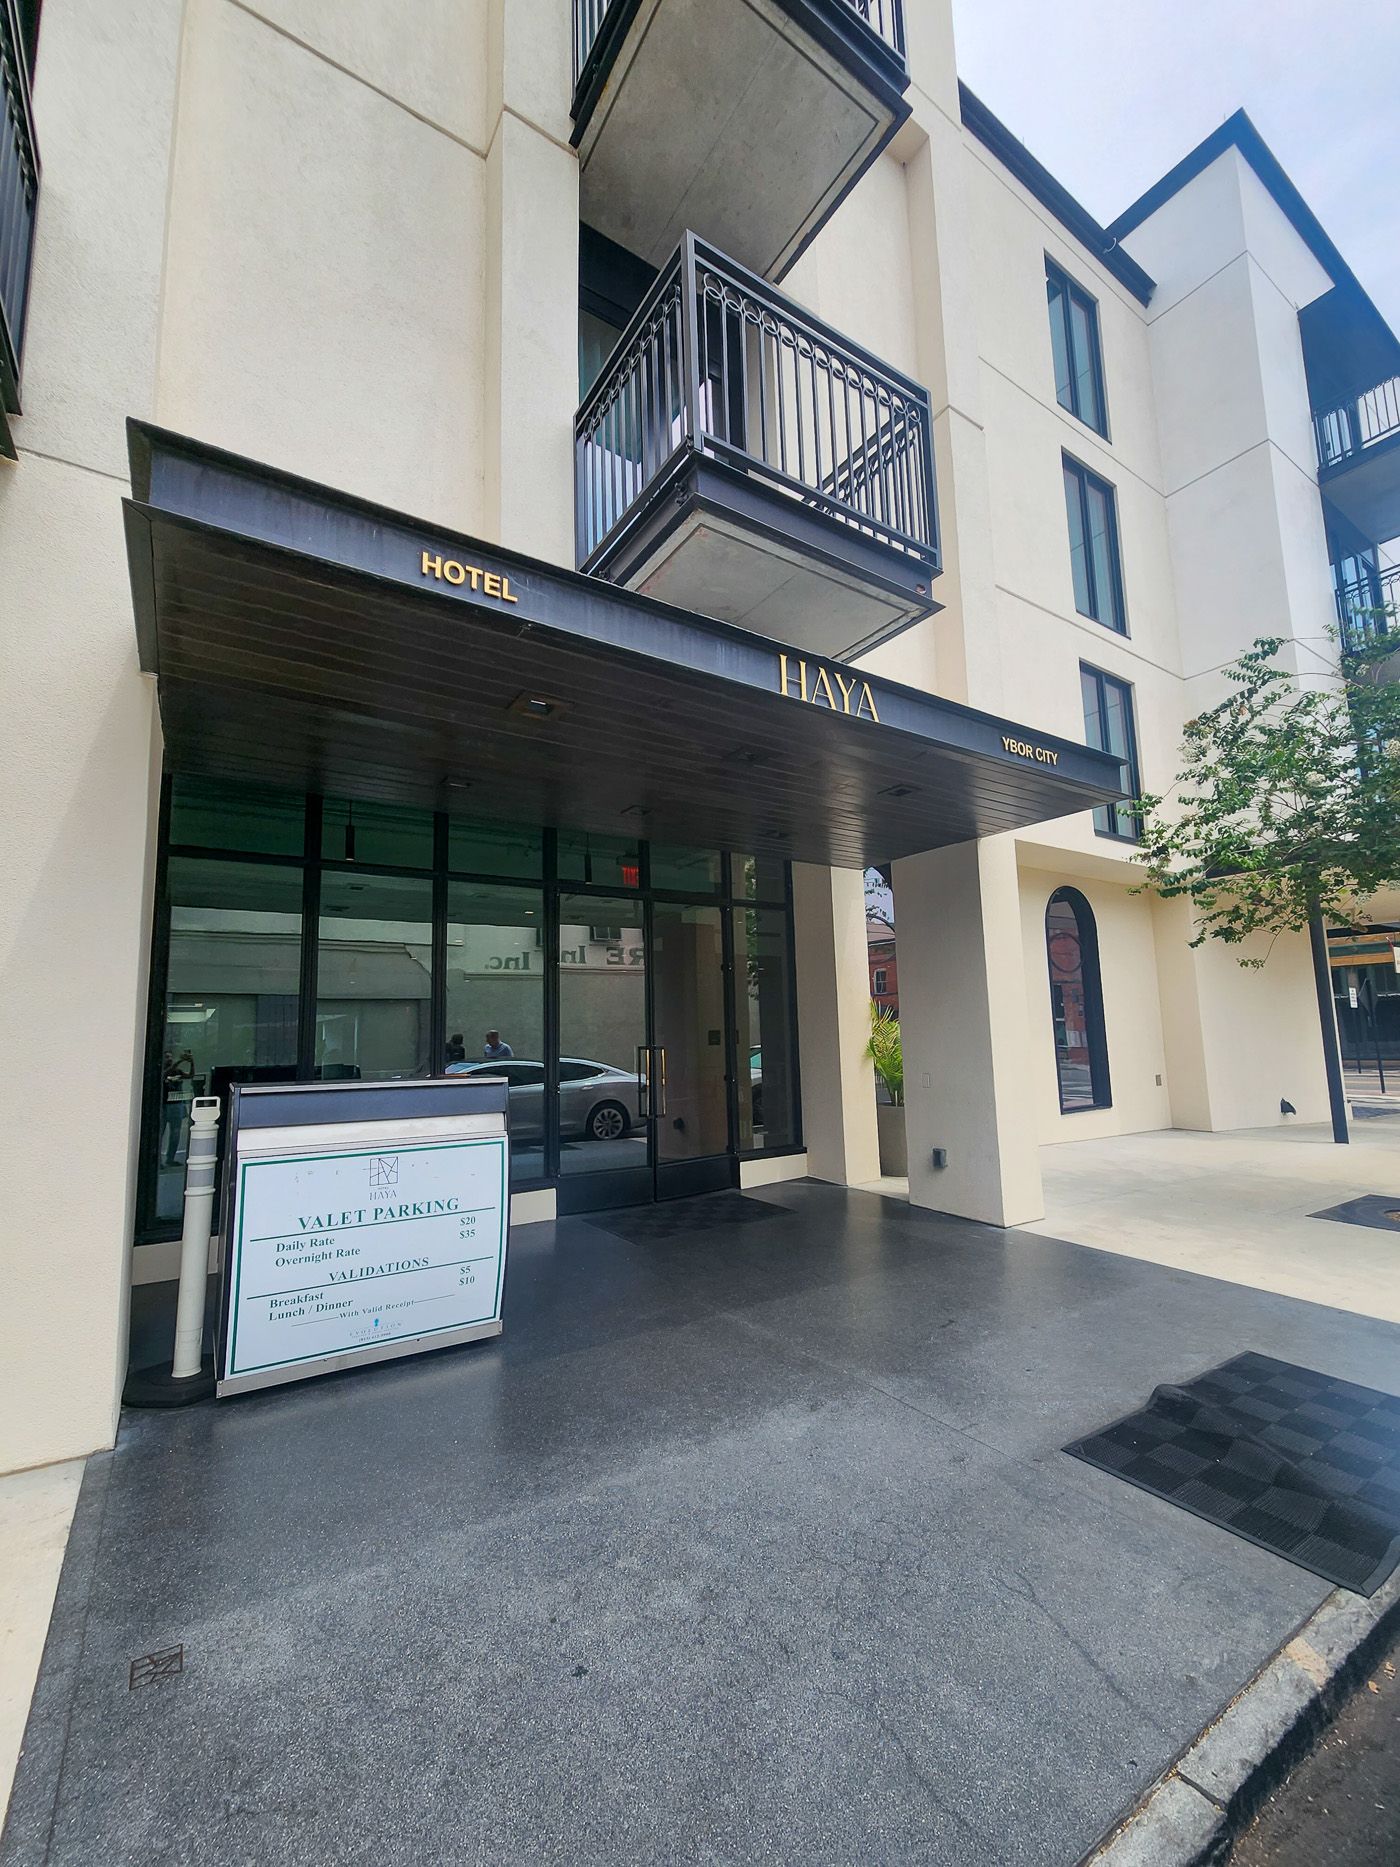 Hotel Haya is a wheelchair accessible hotel in tampa, with step-free access